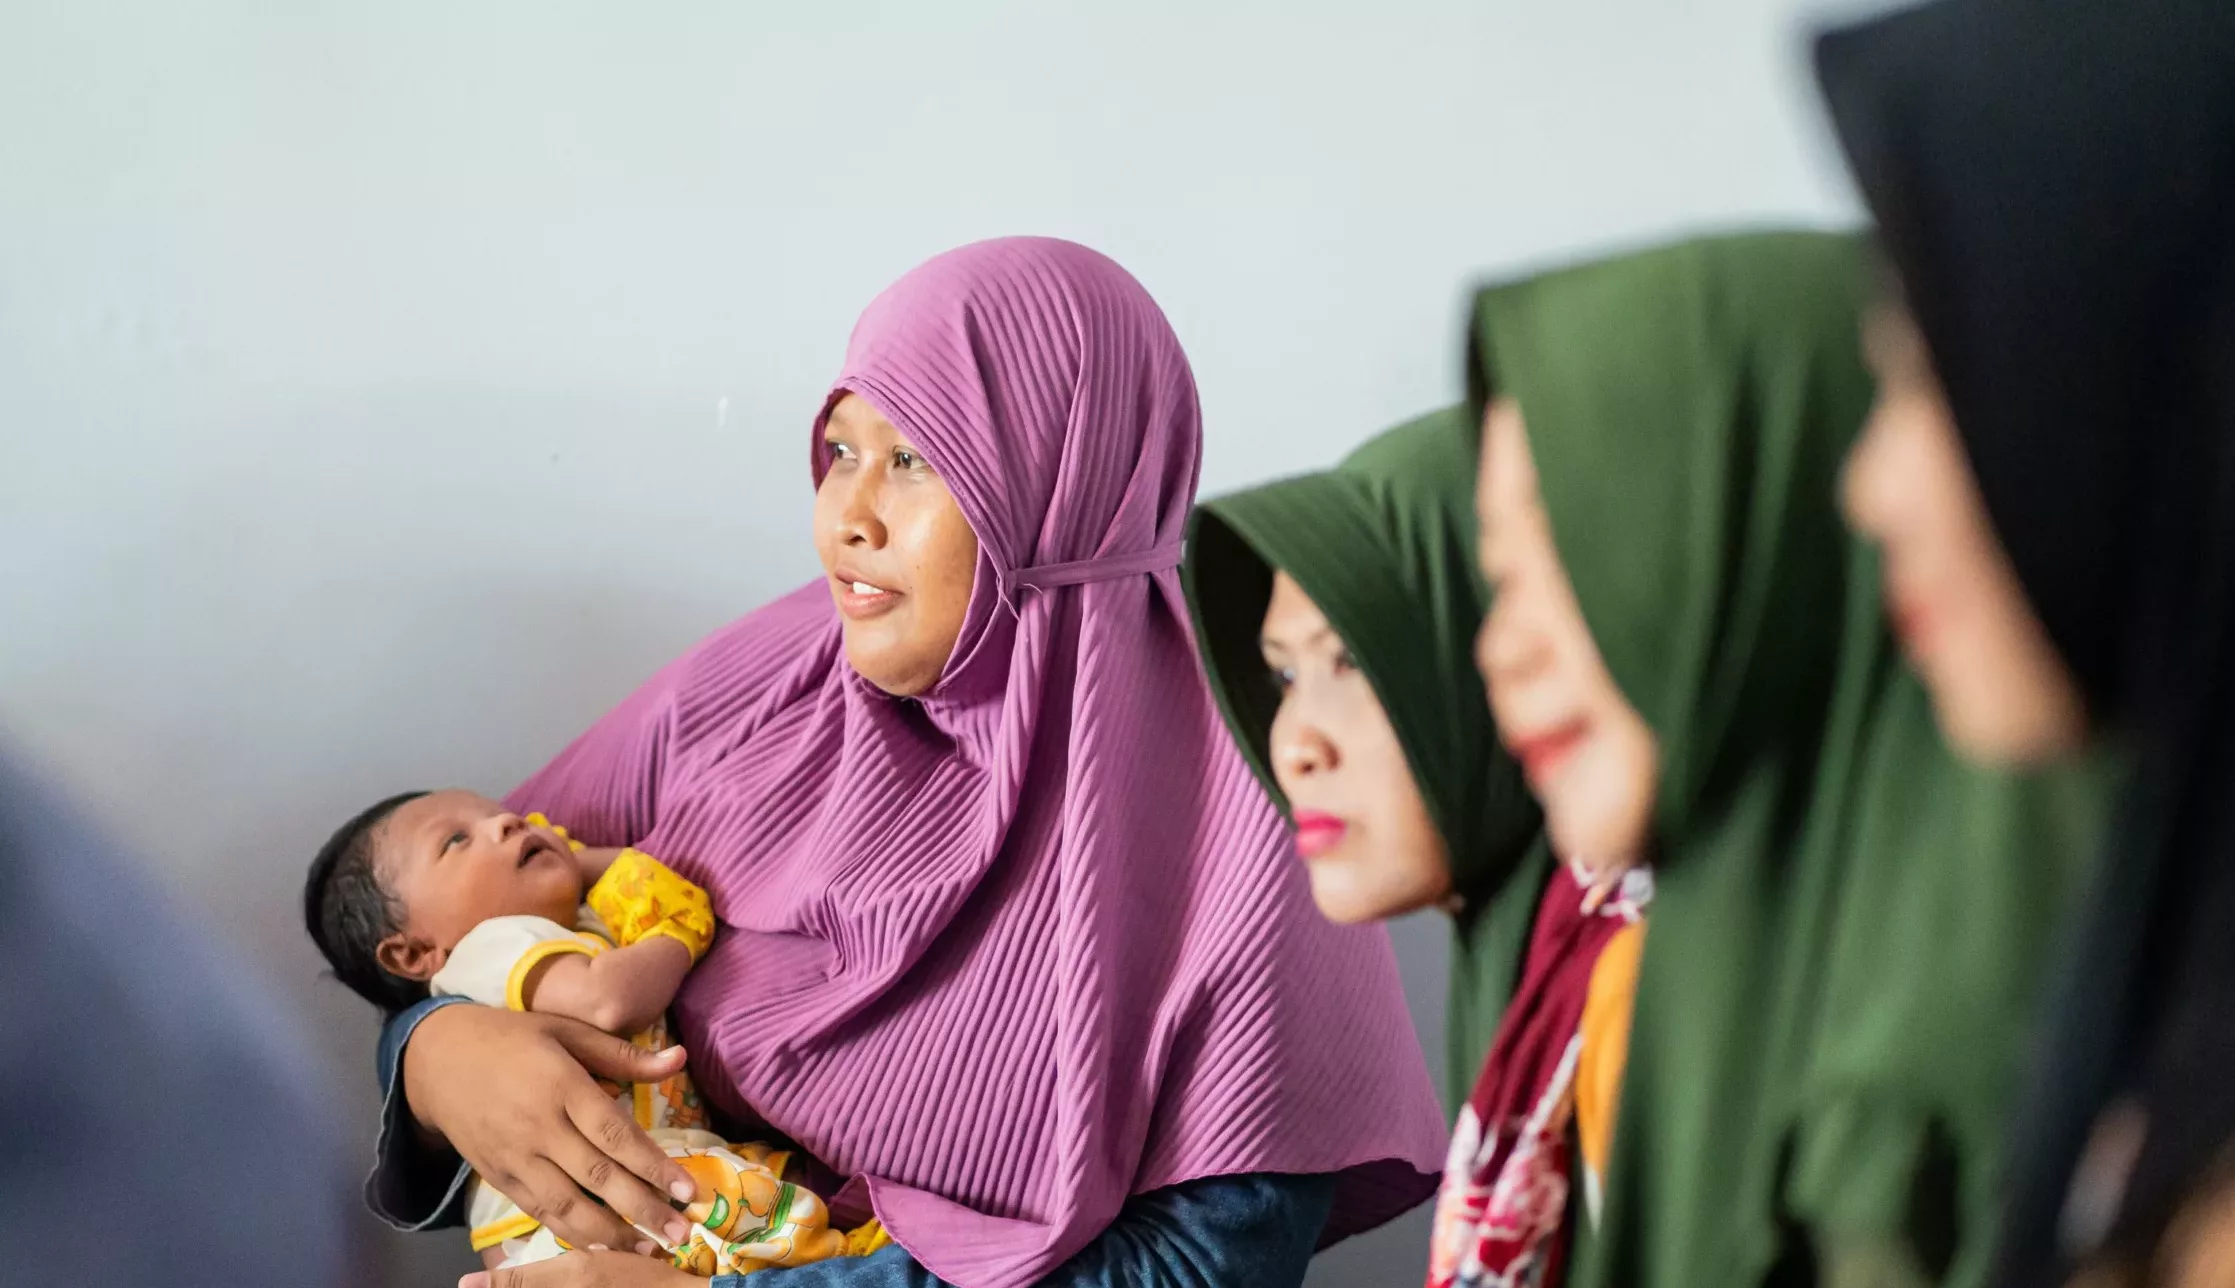 Kaders (community health workers) and new mothers convene at a trusted midwife’s home in Pamekasan, Indonesia.